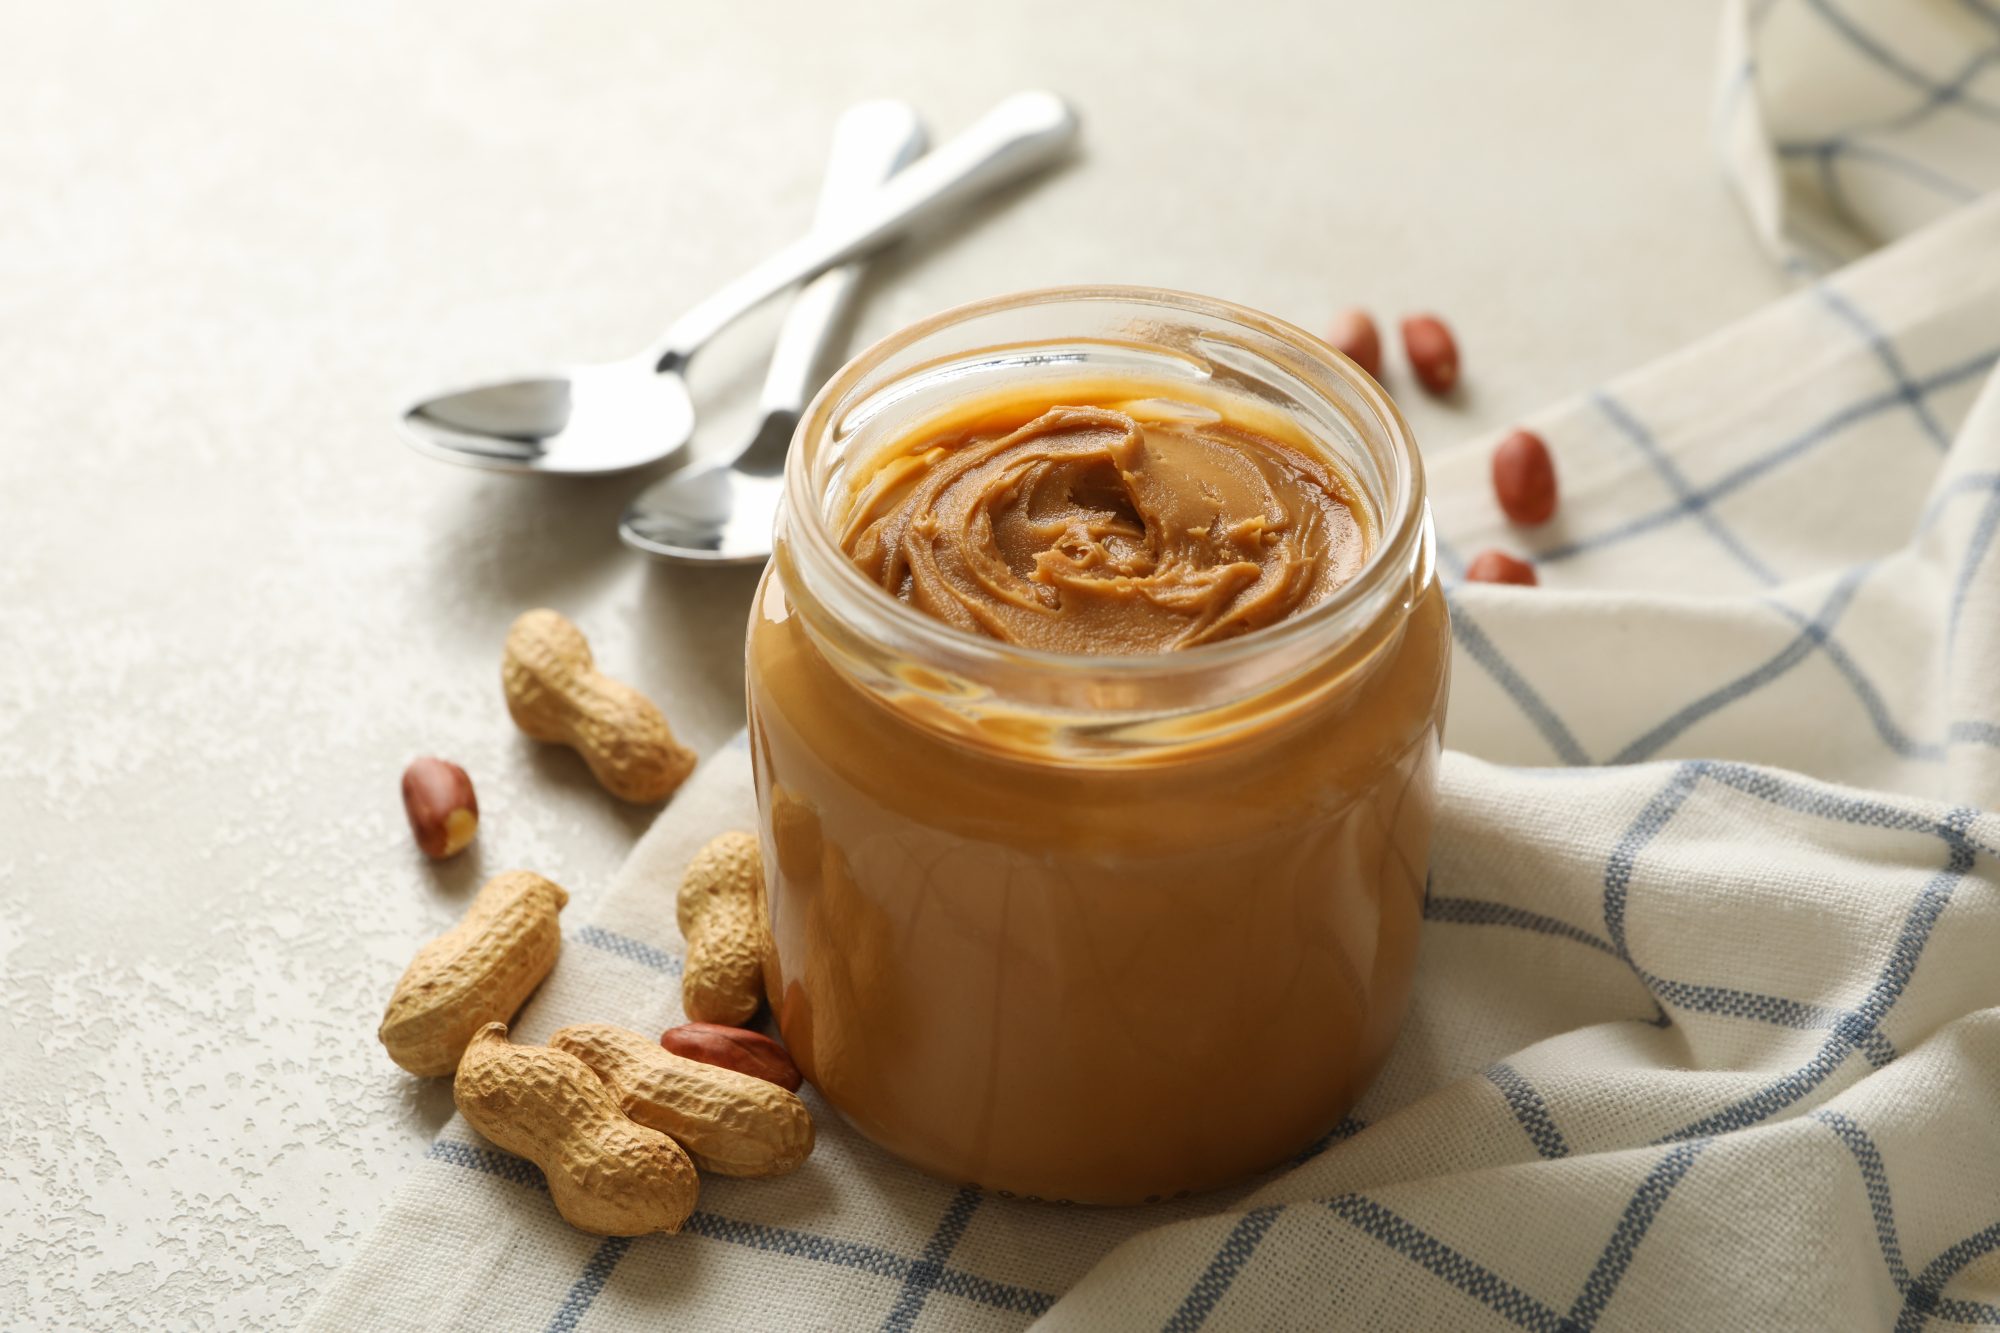 Peanut butter is good for weight loss